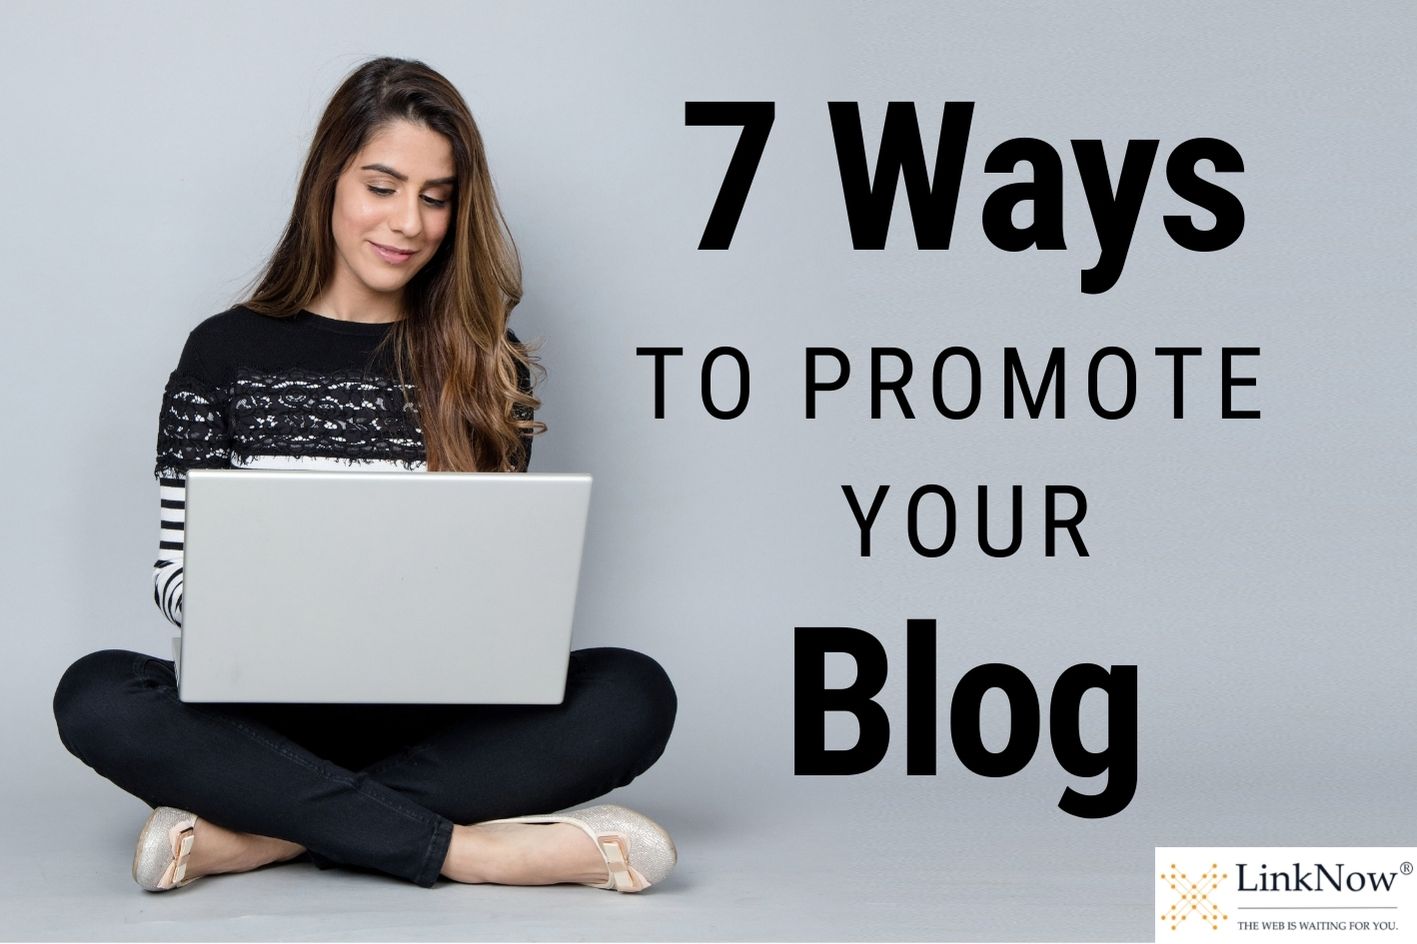 A woman sits cross-legged with a laptop on her lap. Text says: 7 ways to promote your blog.